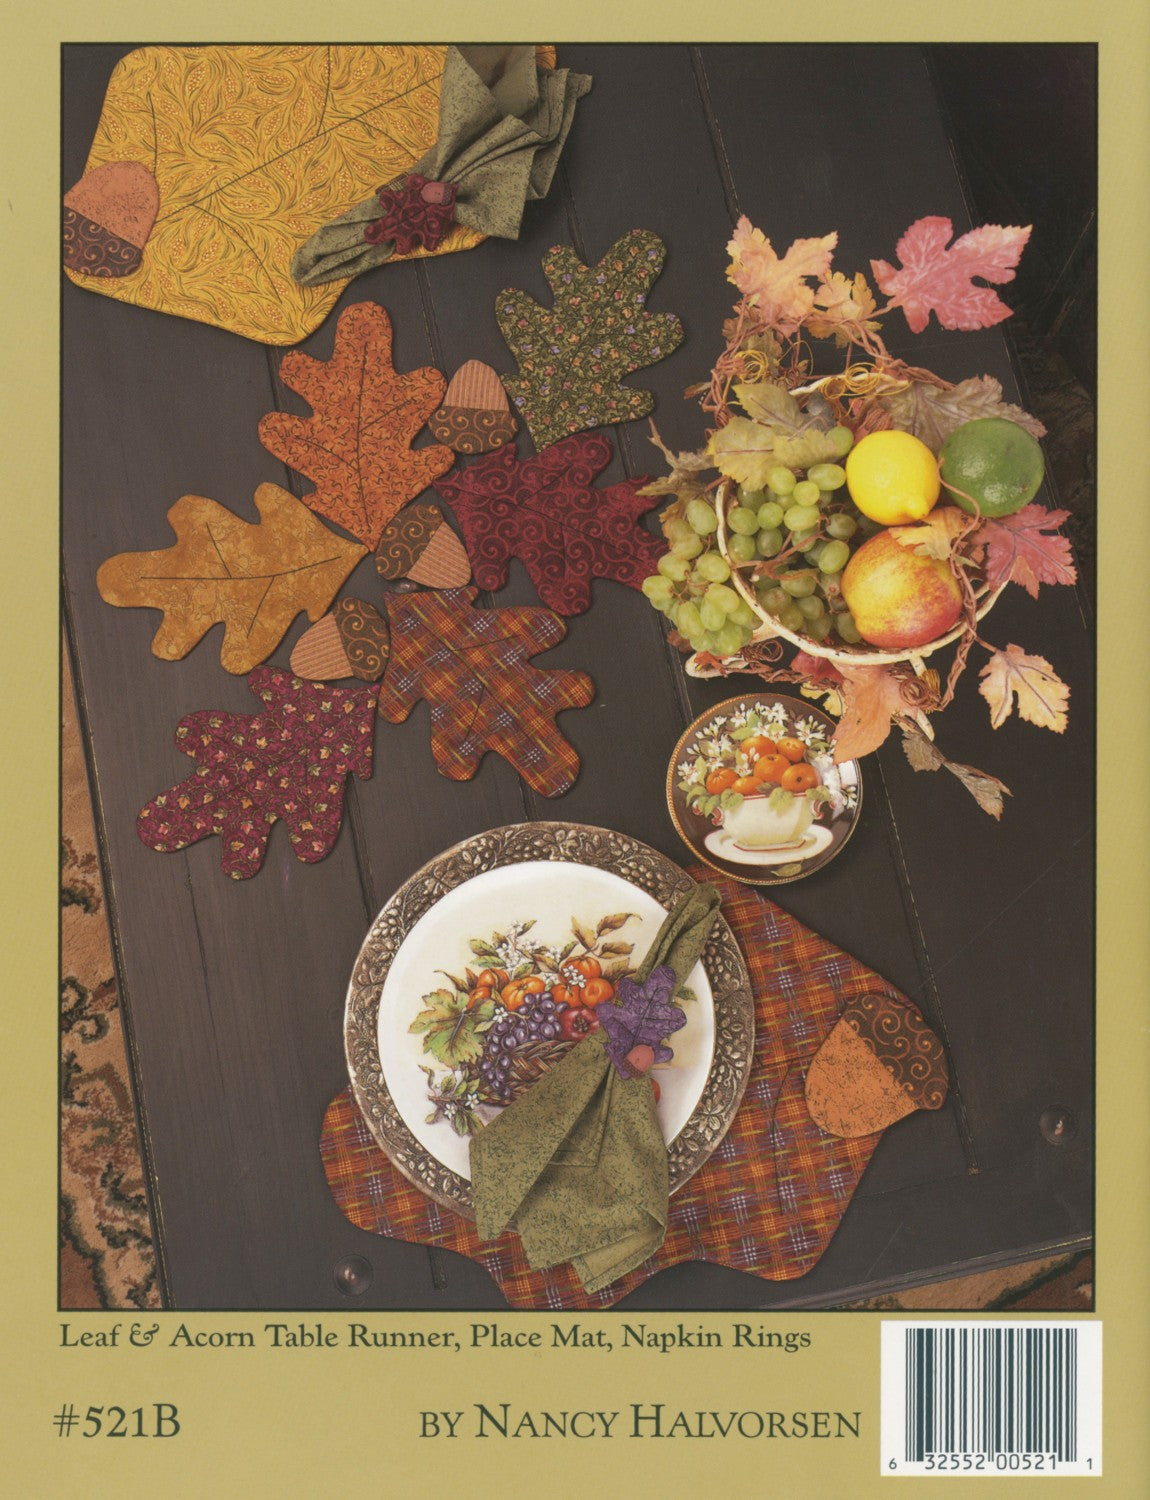 Easy Does it for Autumn - from Art to Heart by Nancy Halvorsen